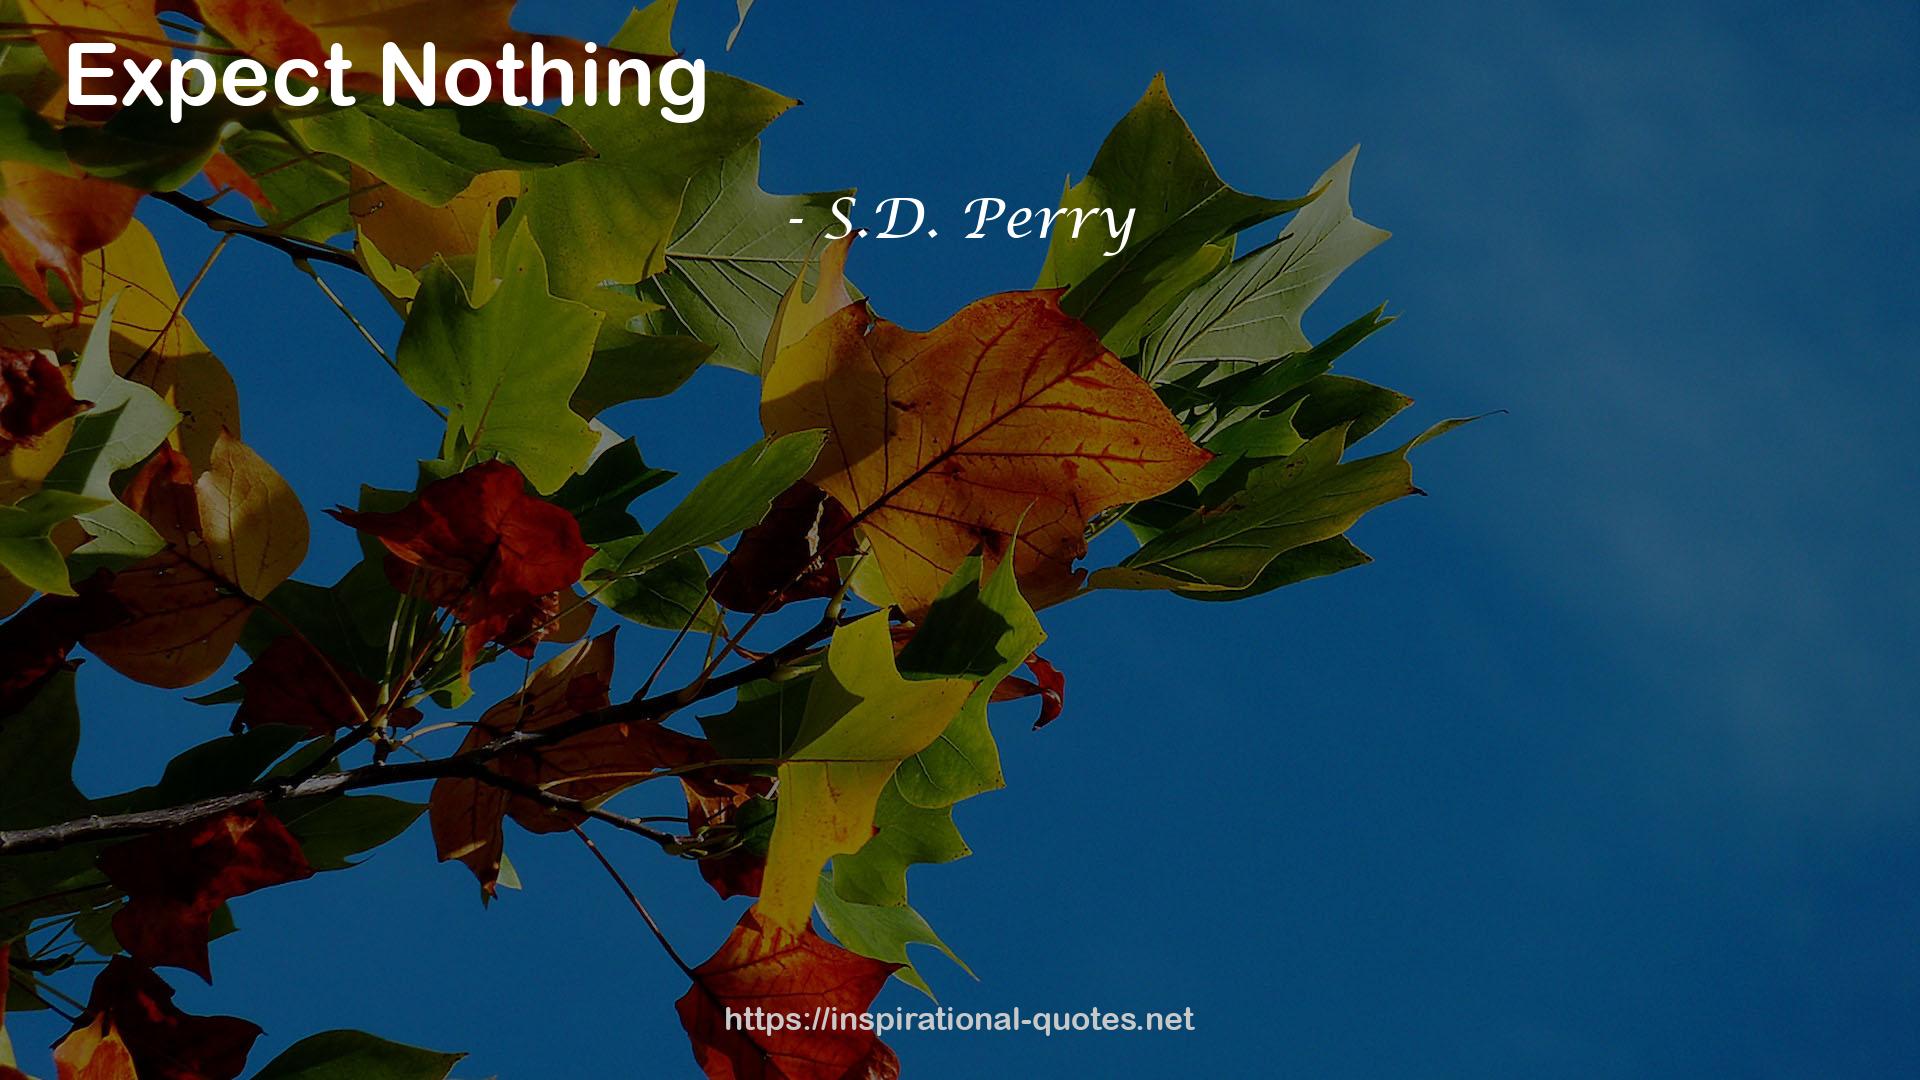 S.D. Perry QUOTES